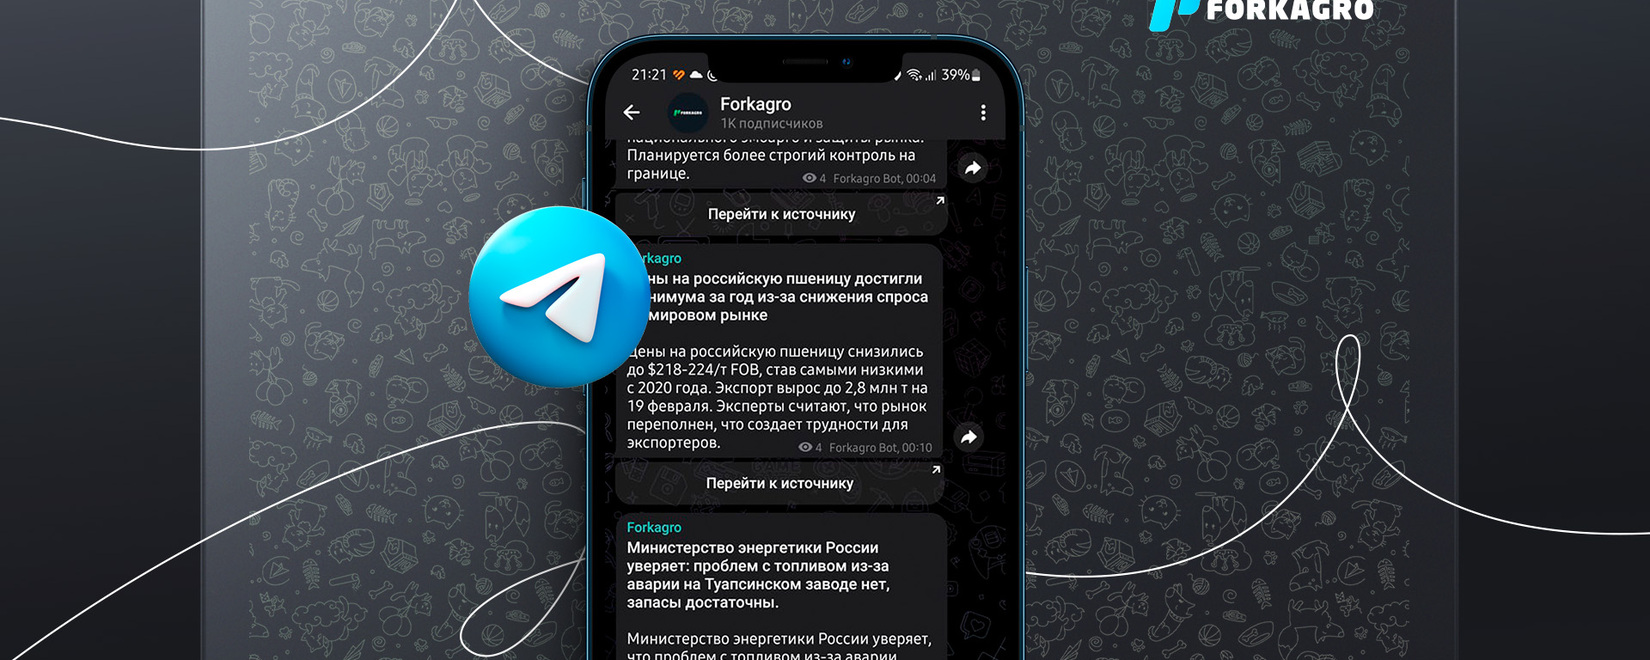 Forkagro is now available on Telegram